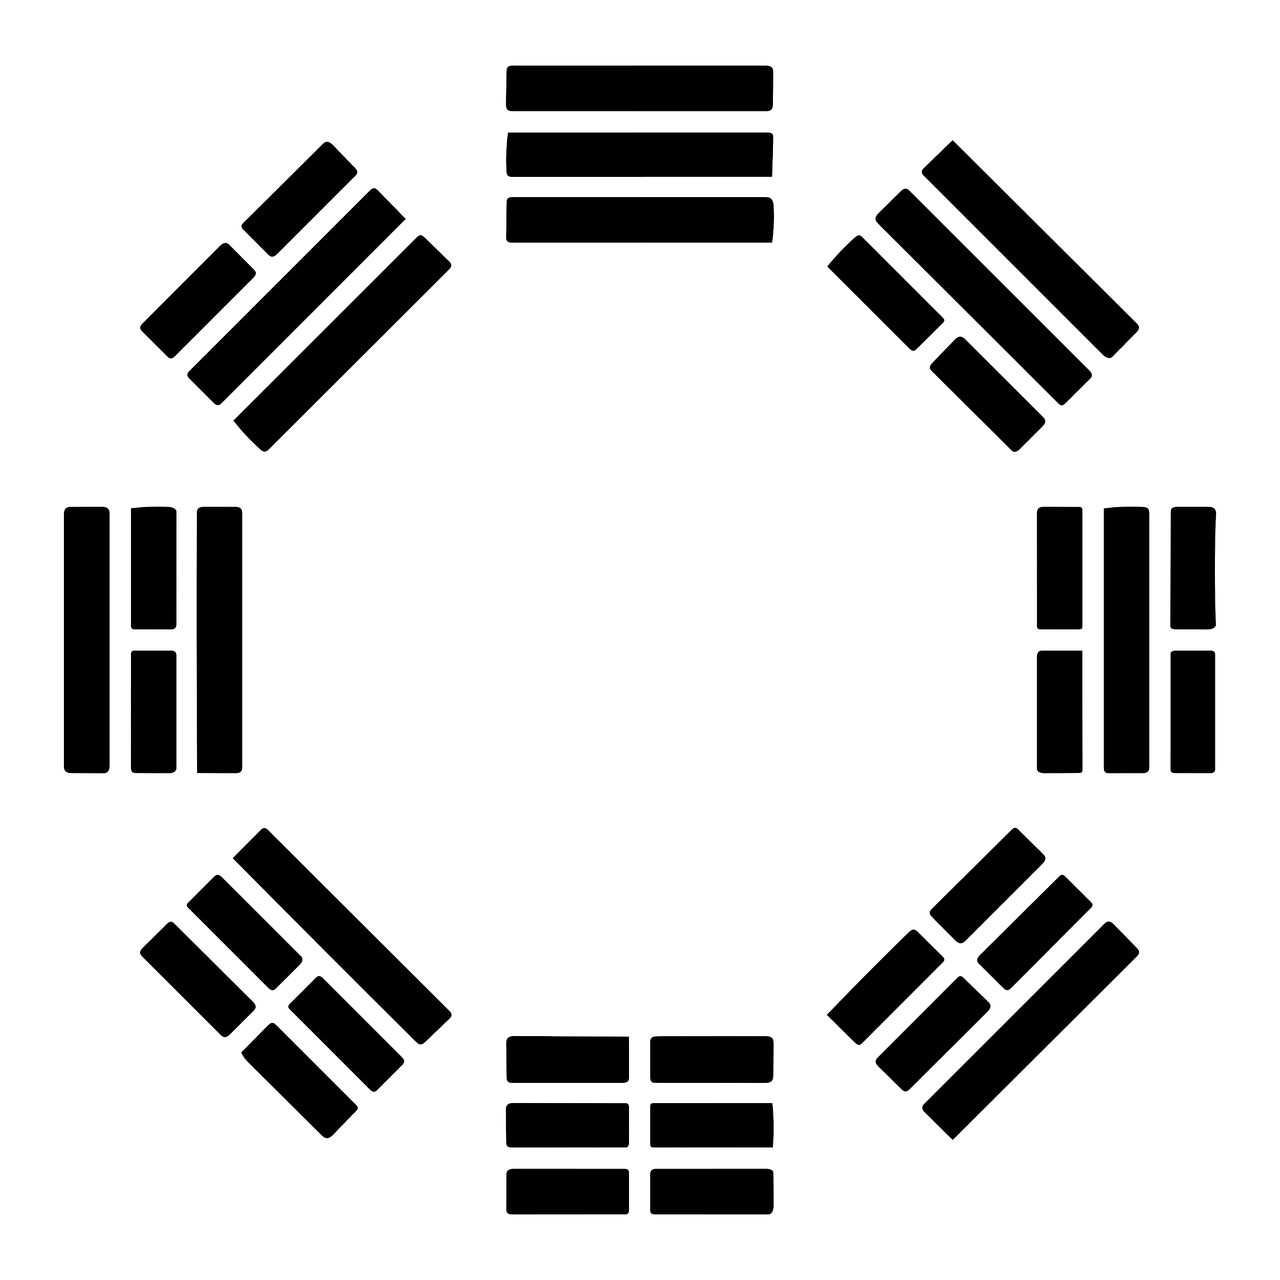 a circle of rectangles on a black background, an album cover, inspired by Xi Gang, ascii art, ambient occlusion:3, huhd, imperial military, 2 0 1 0